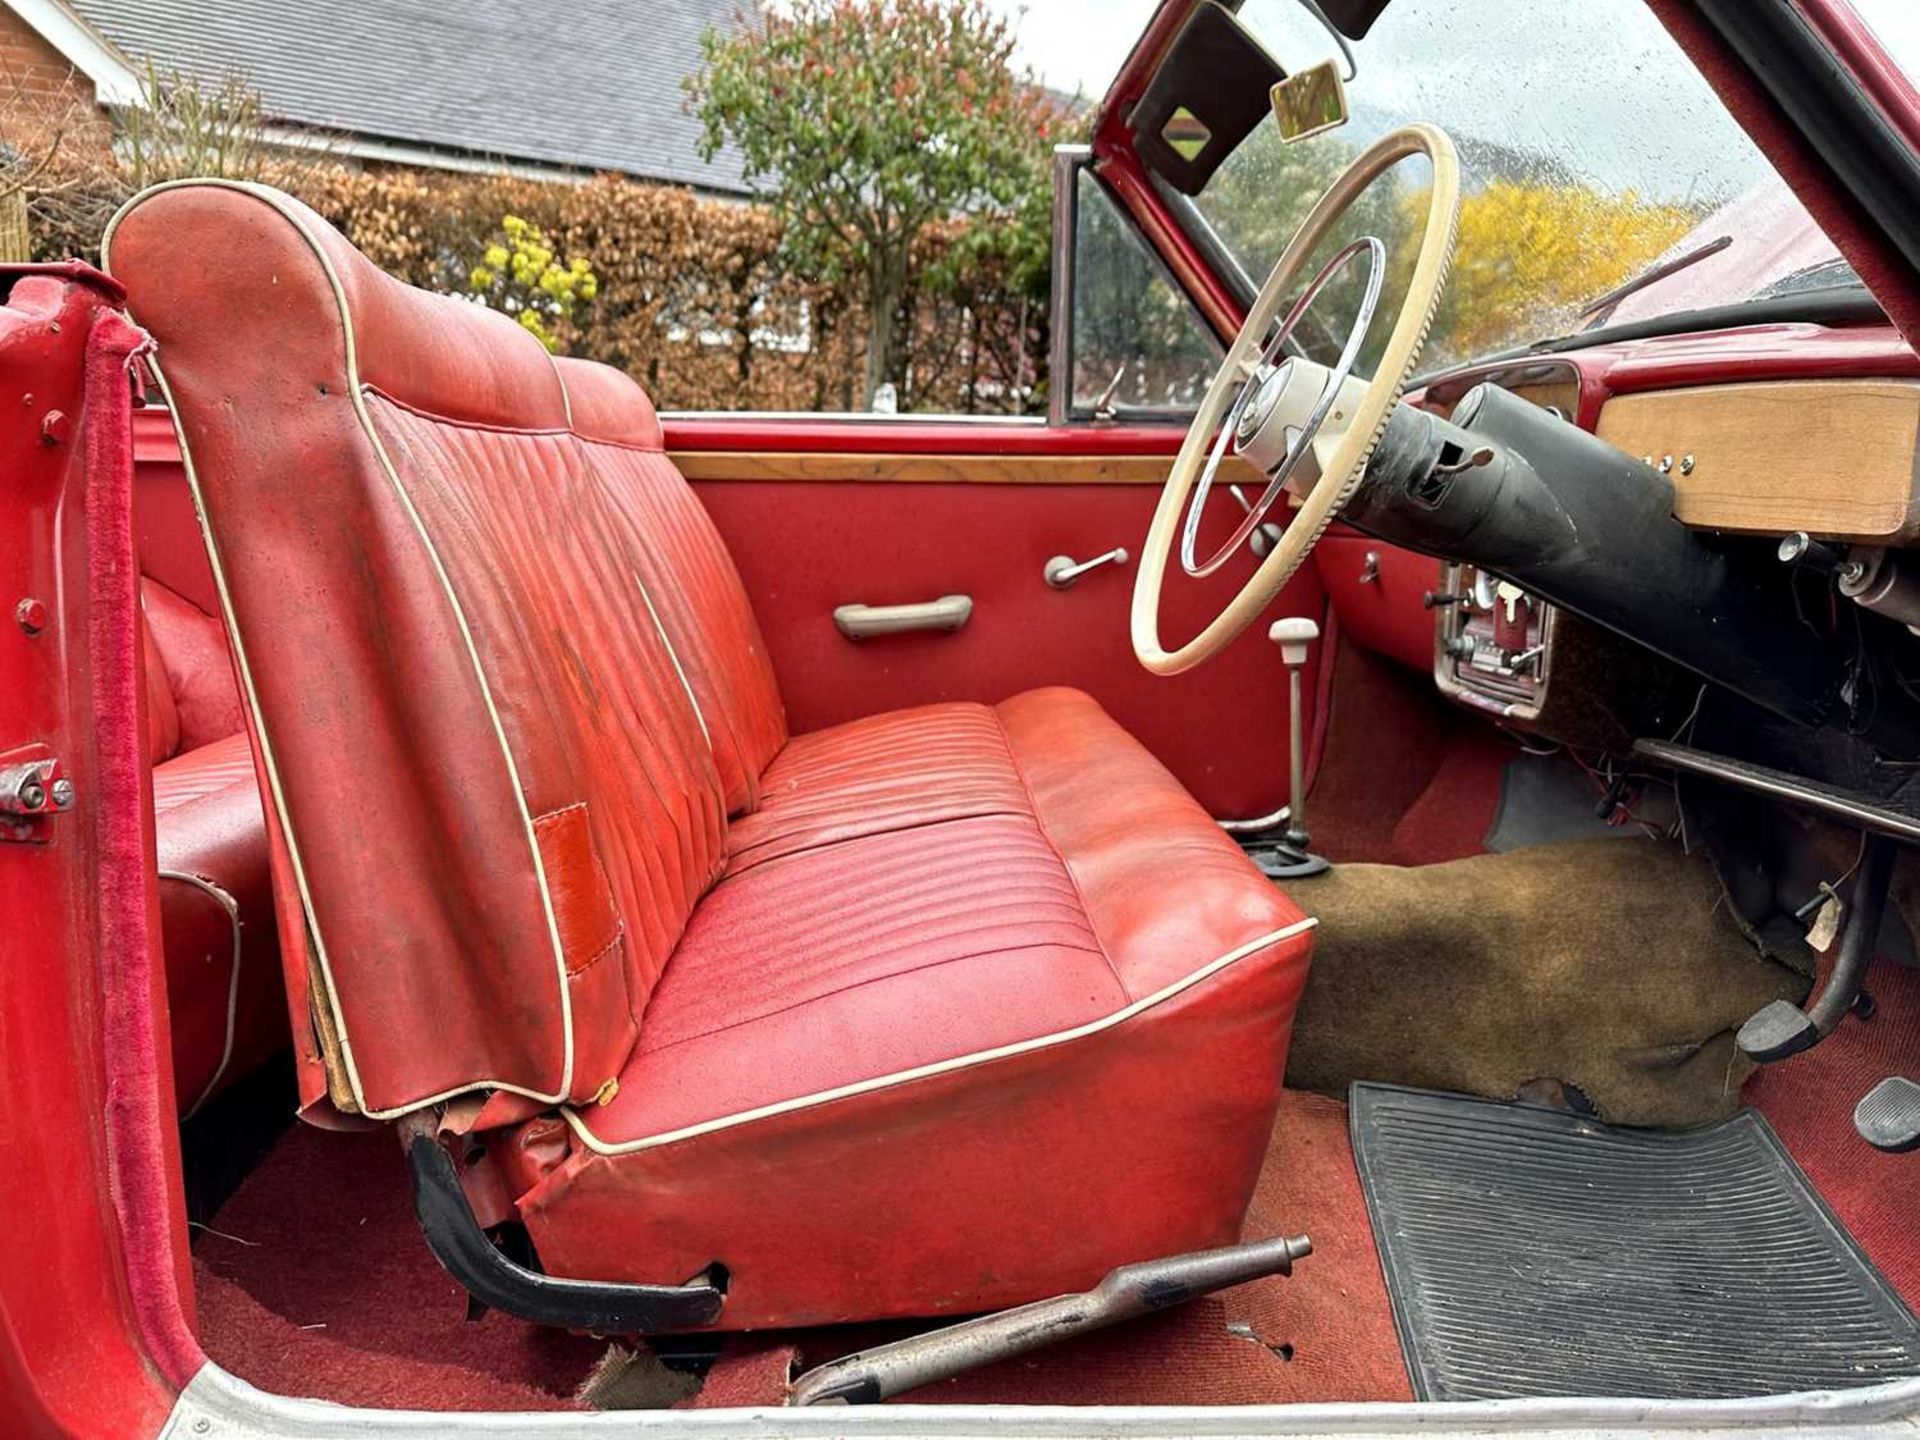 1961 Singer Gazelle Convertible Comes complete with overdrive, period radio and badge bar - Bild 43 aus 95